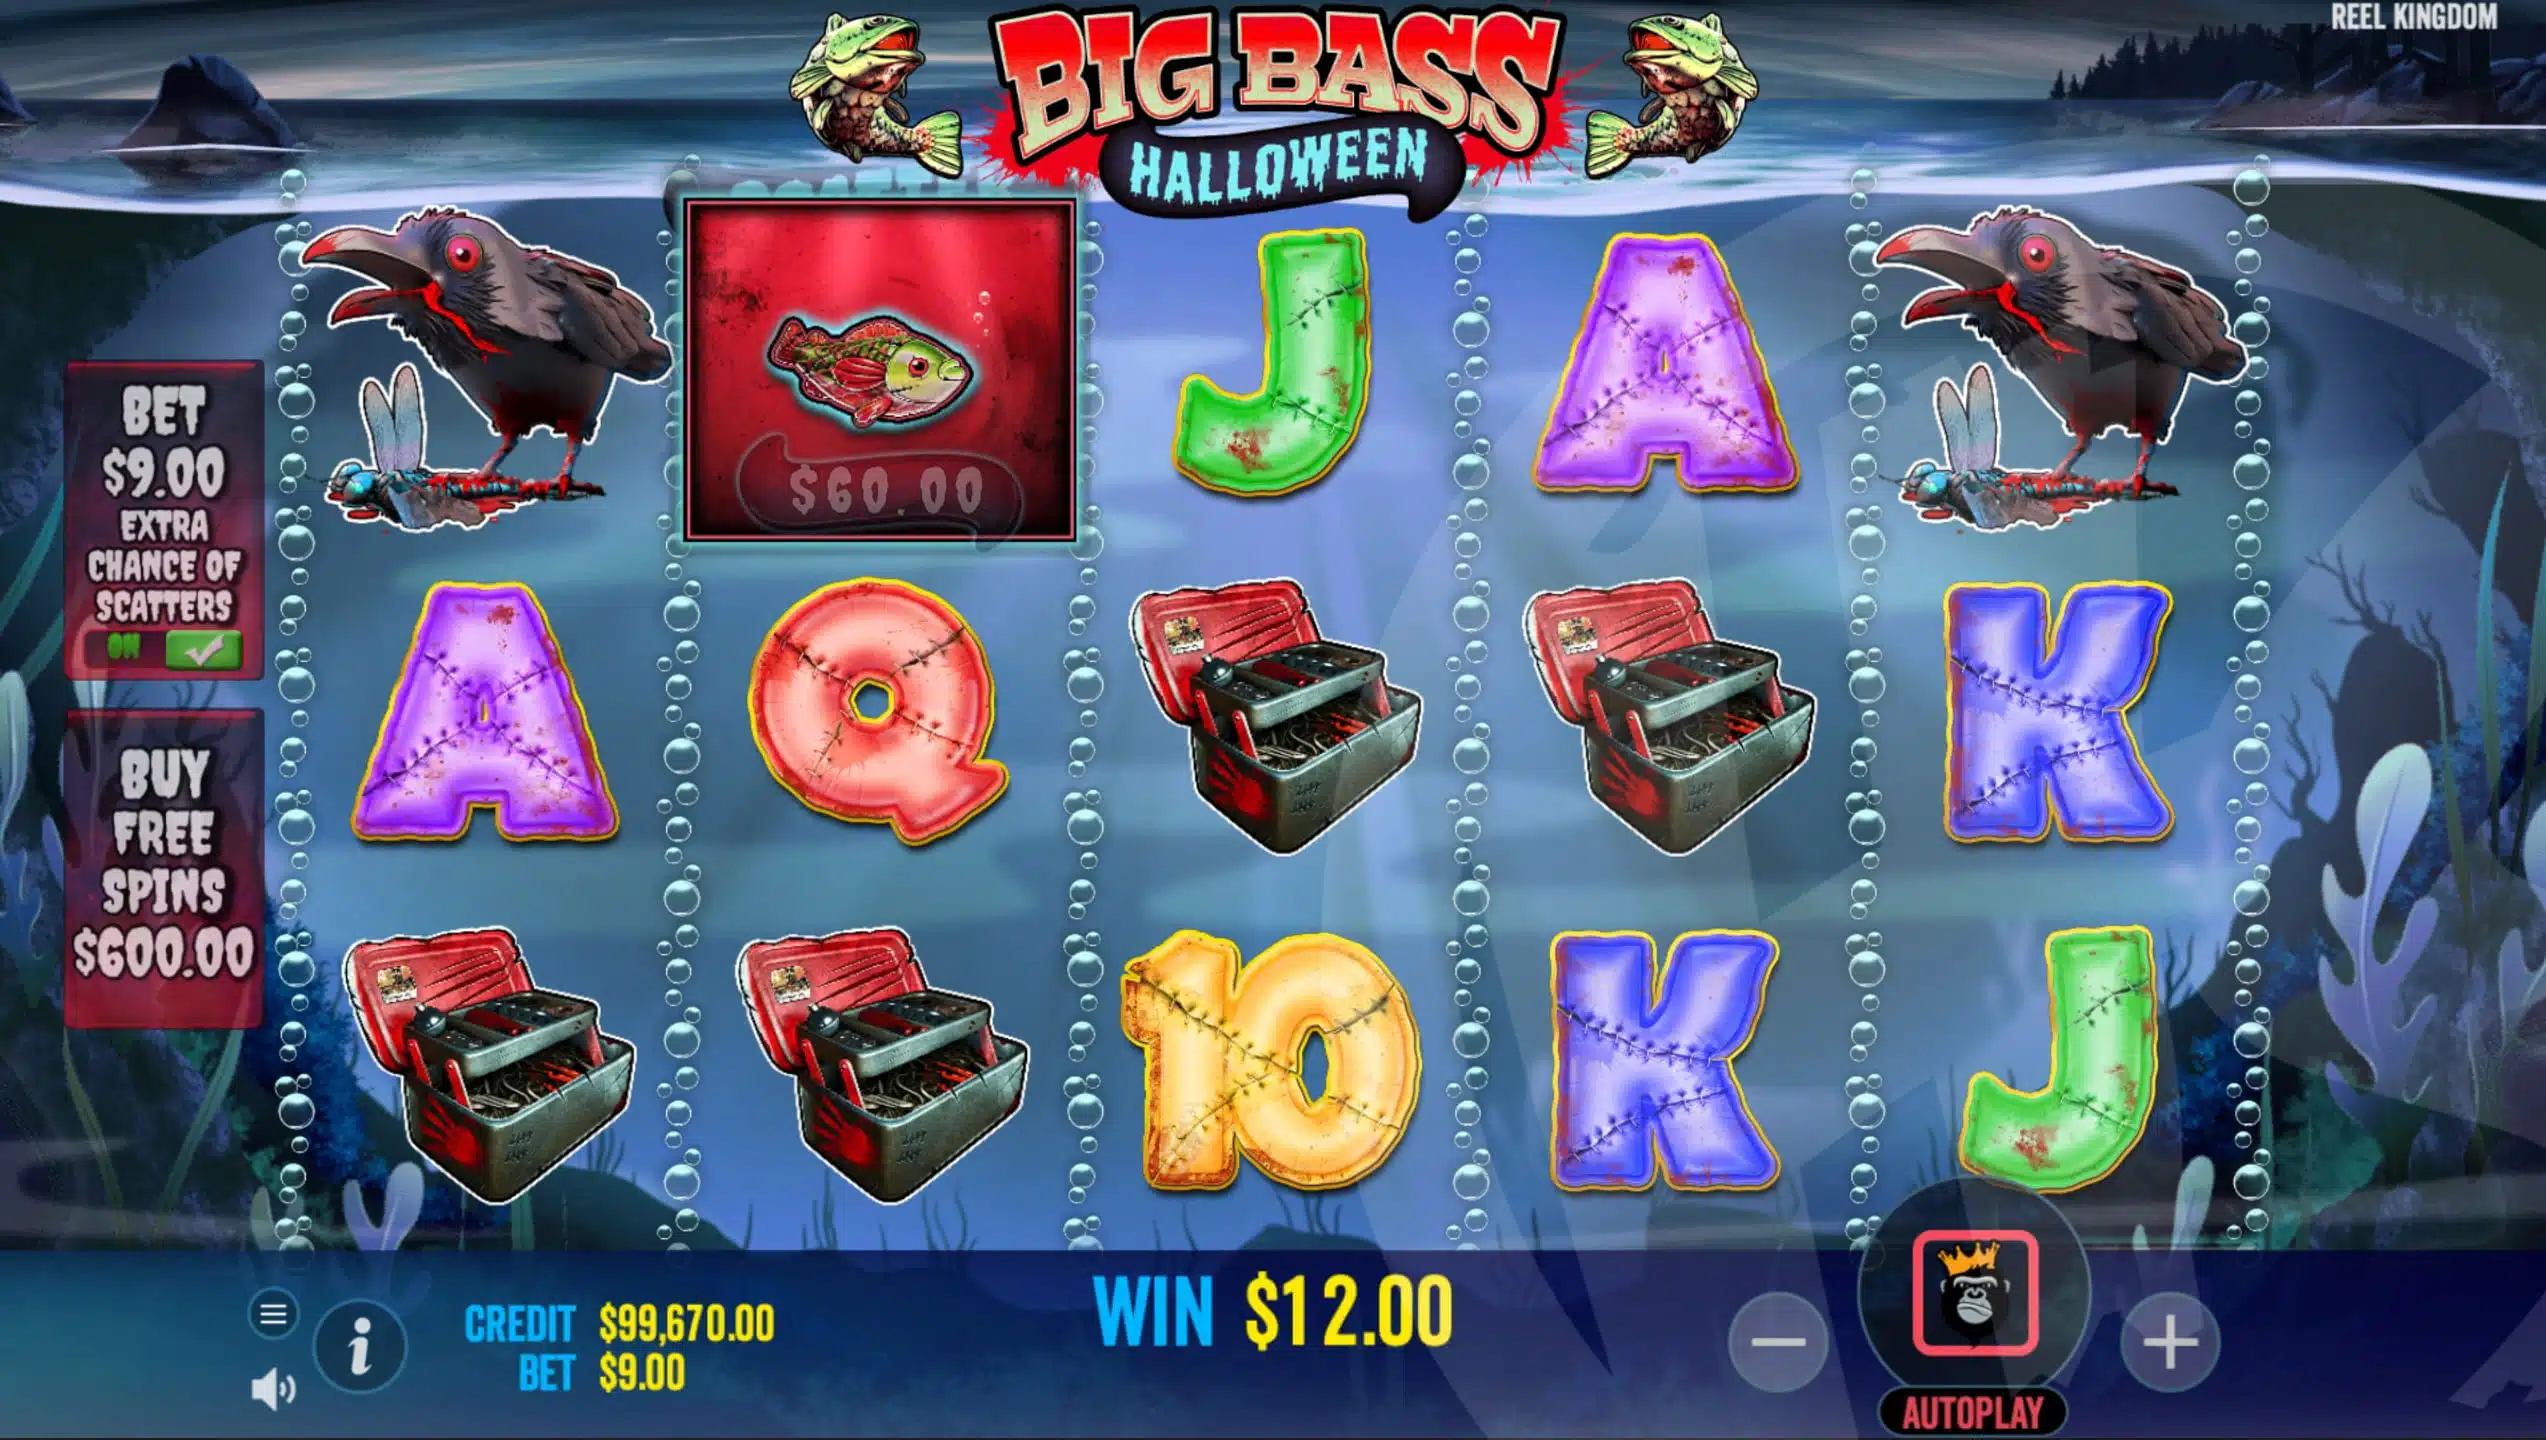 Big Bass Halloween Offers Players 10 Fixed Win Lines